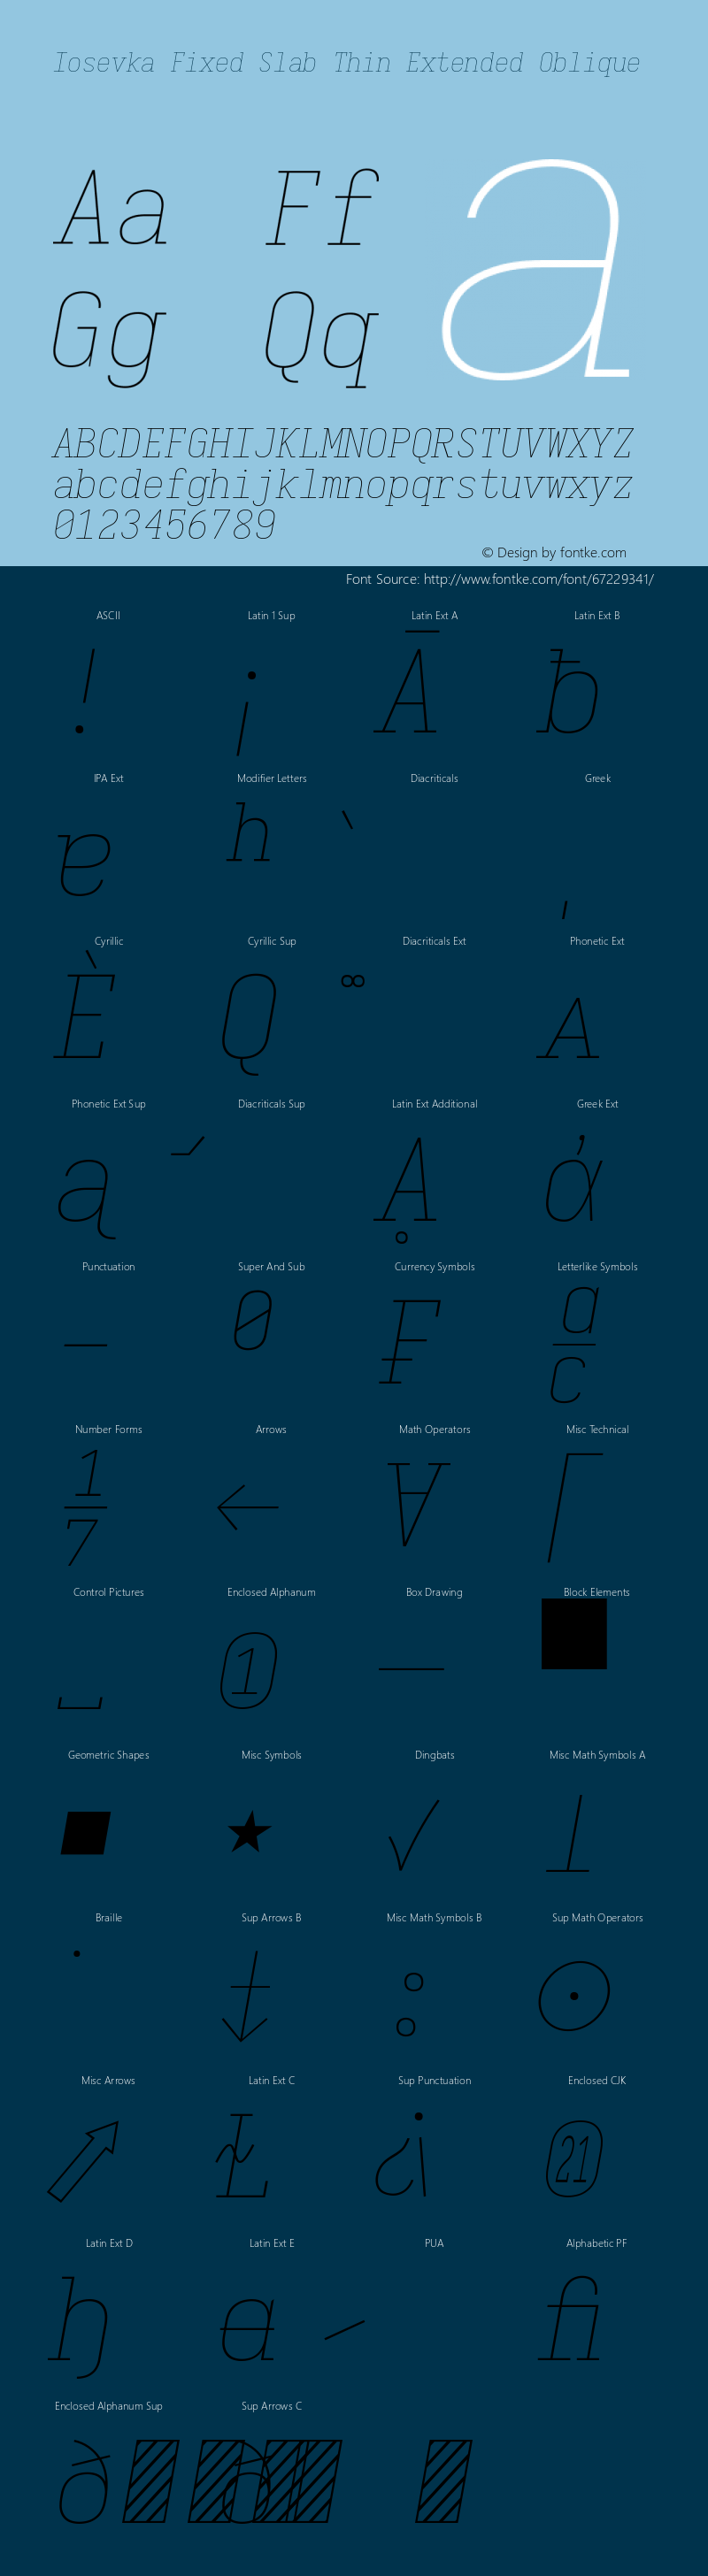 Iosevka Fixed Slab Thin Extended Oblique 3.0.0-rc.7 Font Sample